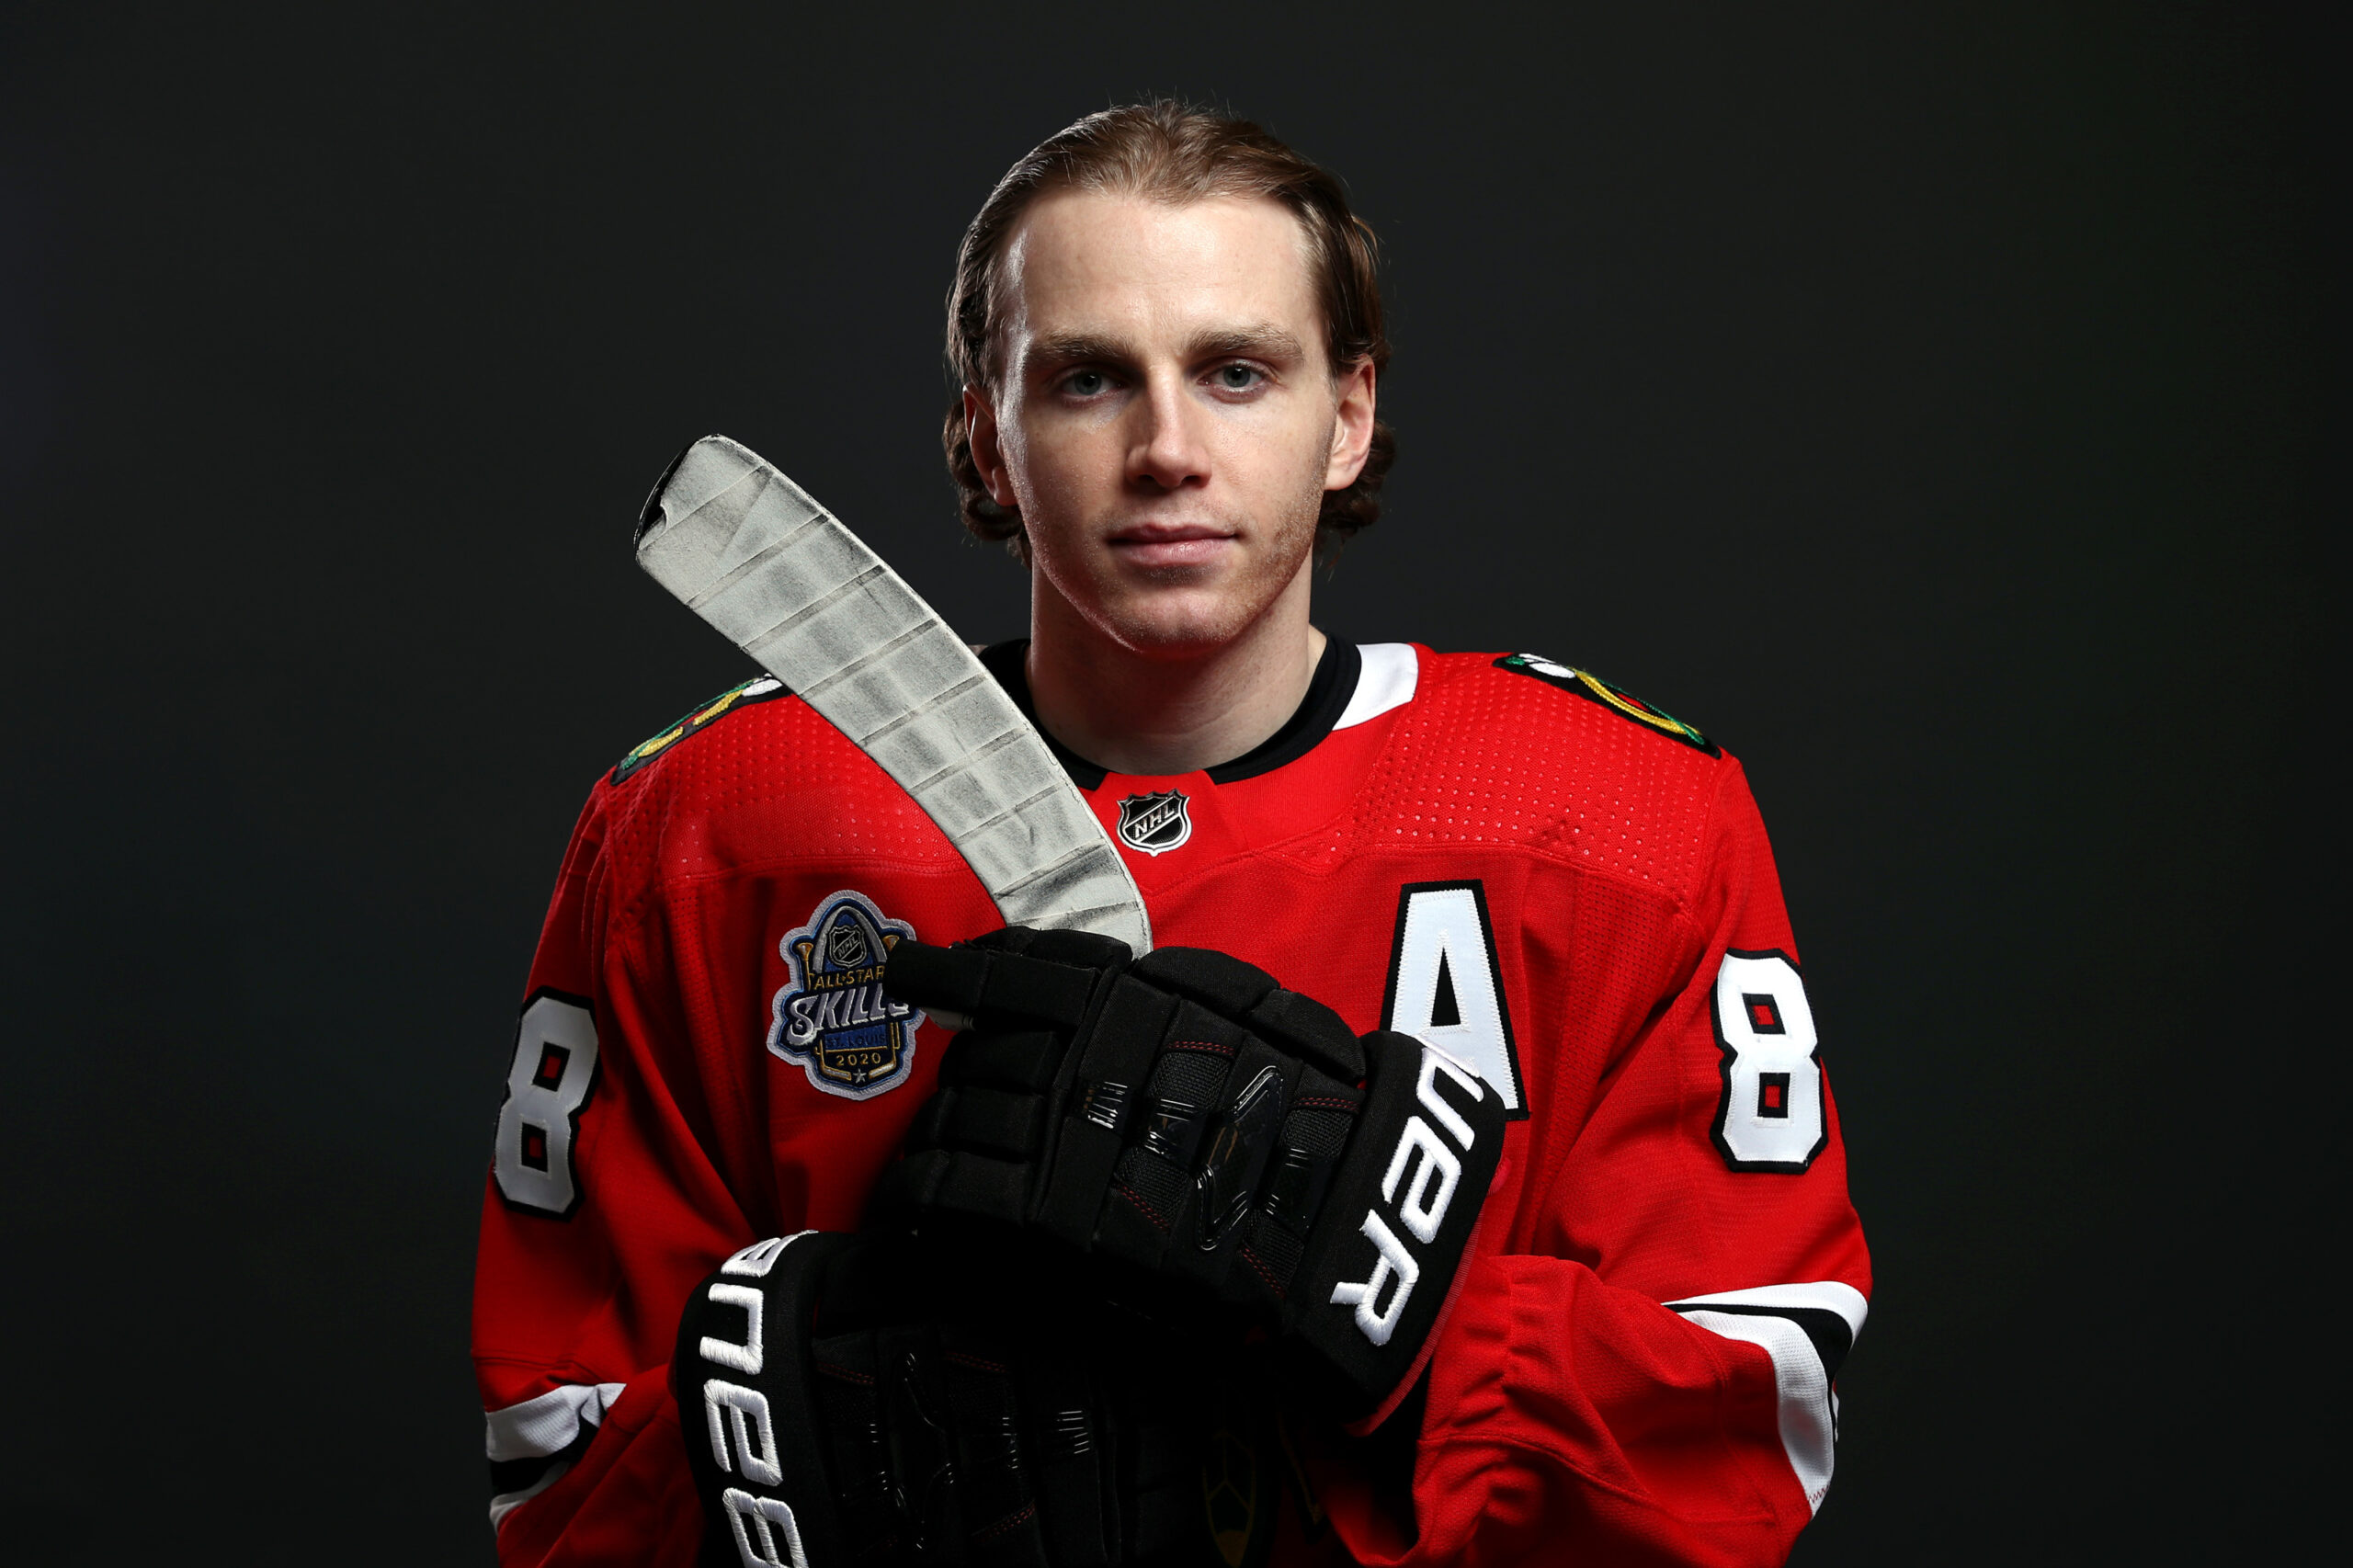 Patrick Kane has rediscovered his first love